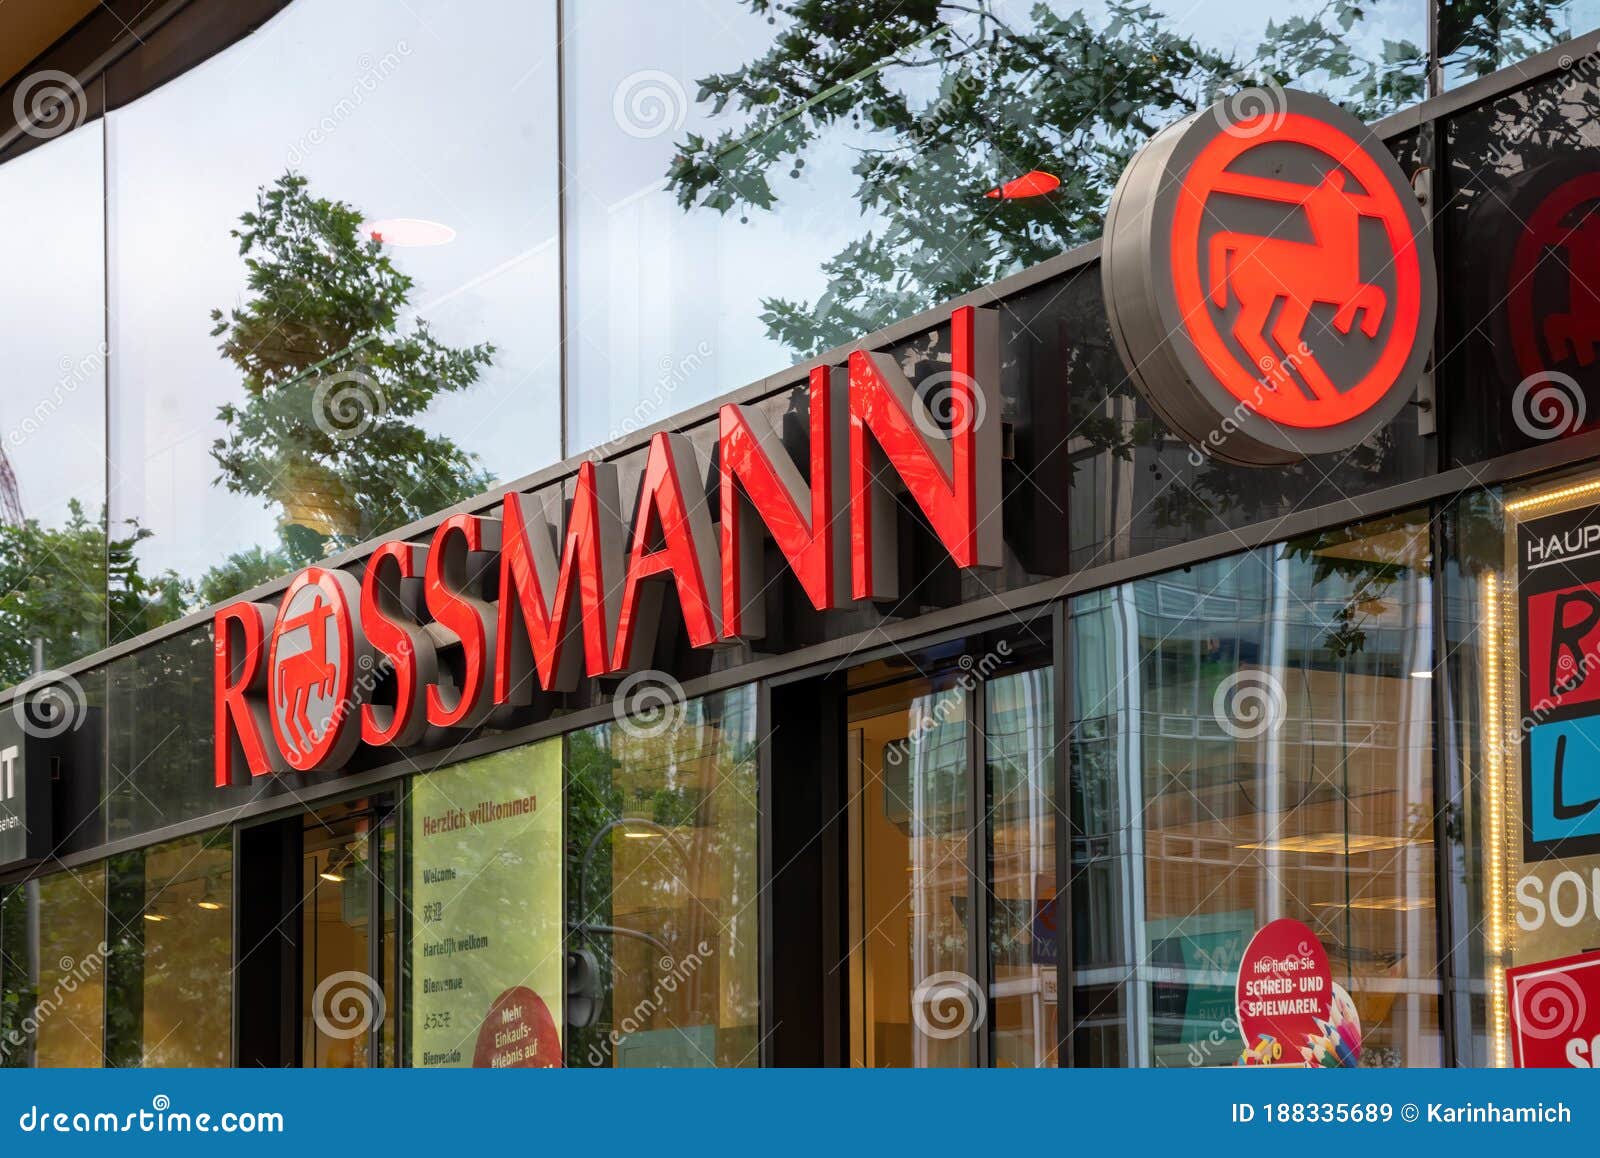 Rossmann Store. Rossmann GmbH Commonly Known As Rossmann Drogeria  Parfumeria Cosmetic Shop is the Second Largest Drugstore Chain Editorial  Stock Image - Image of logo, cosmetic: 188335689